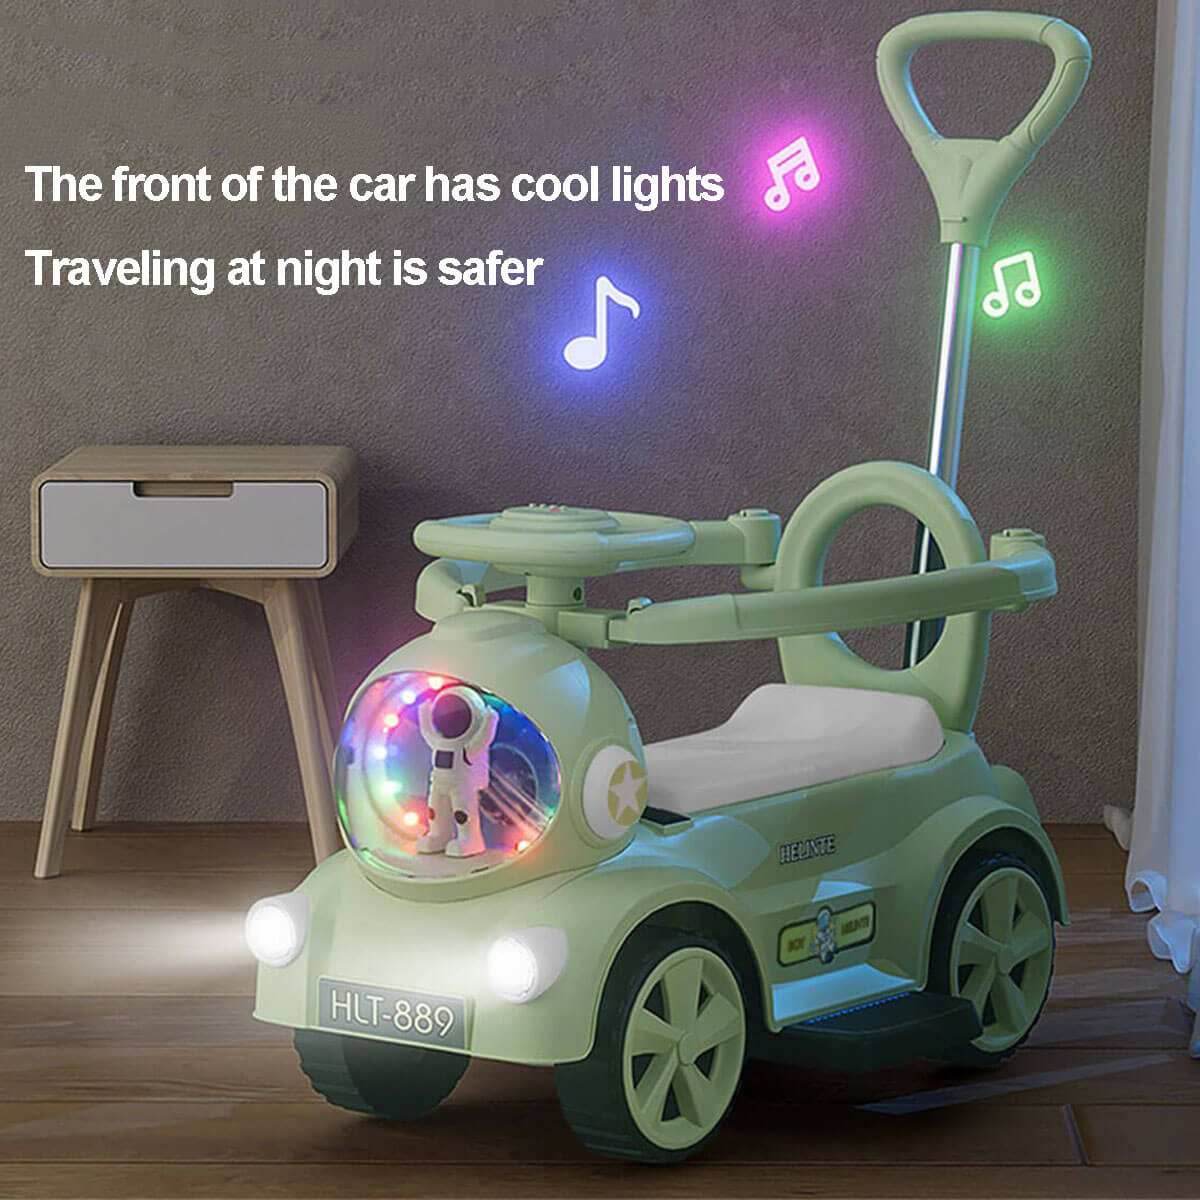 6V Kids Electric Ride On Car Adjustable Push Bar 3-IN-1 Push Car with Lights & Music